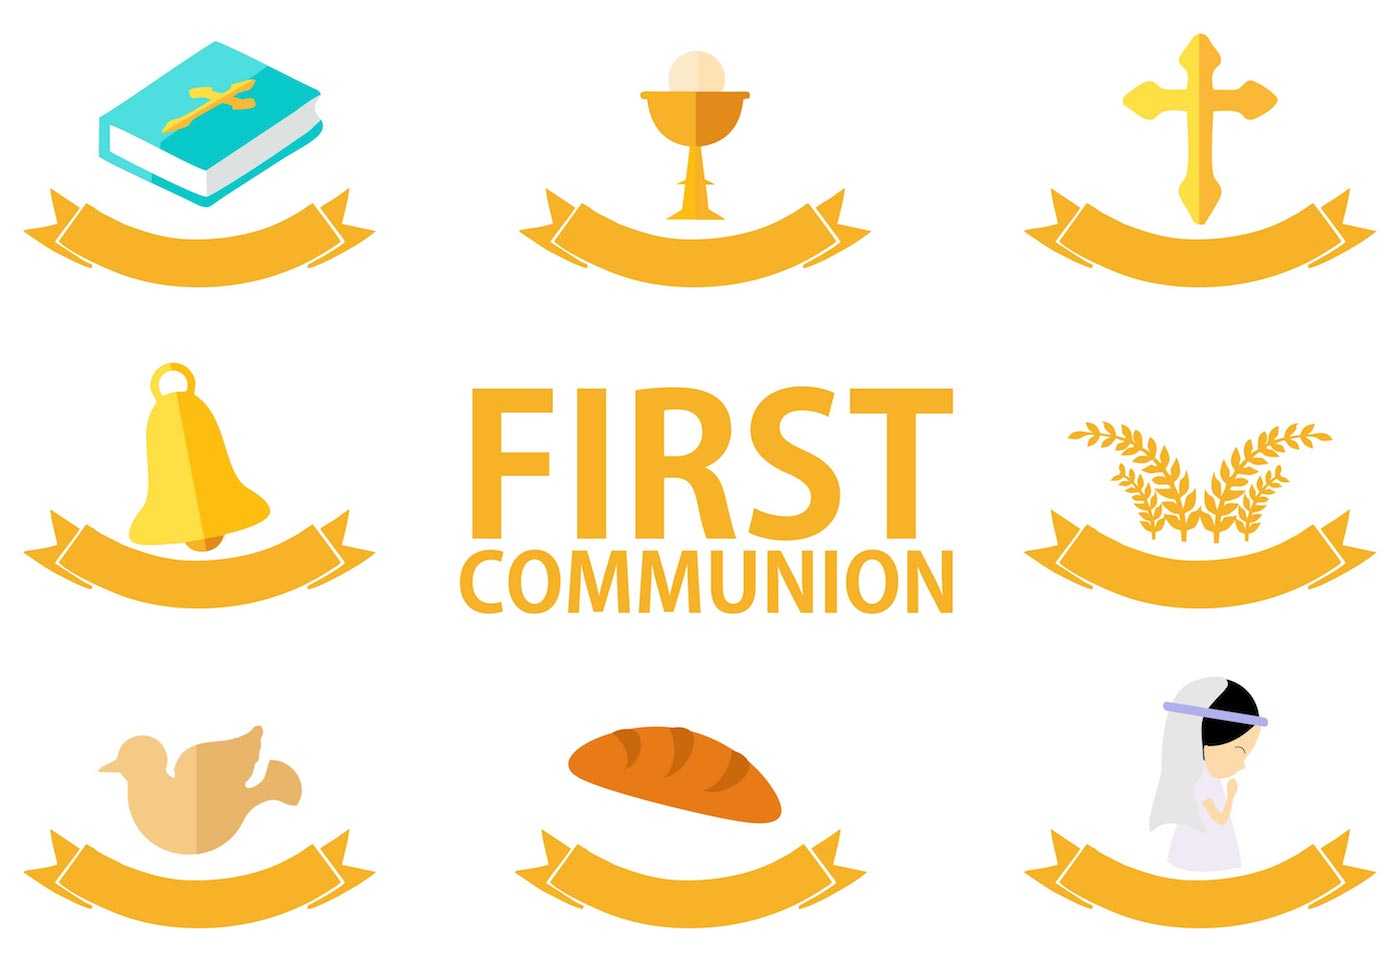 First Communion Template Free Vector Art – (25 Free Downloads) With Regard To First Communion Banner Templates